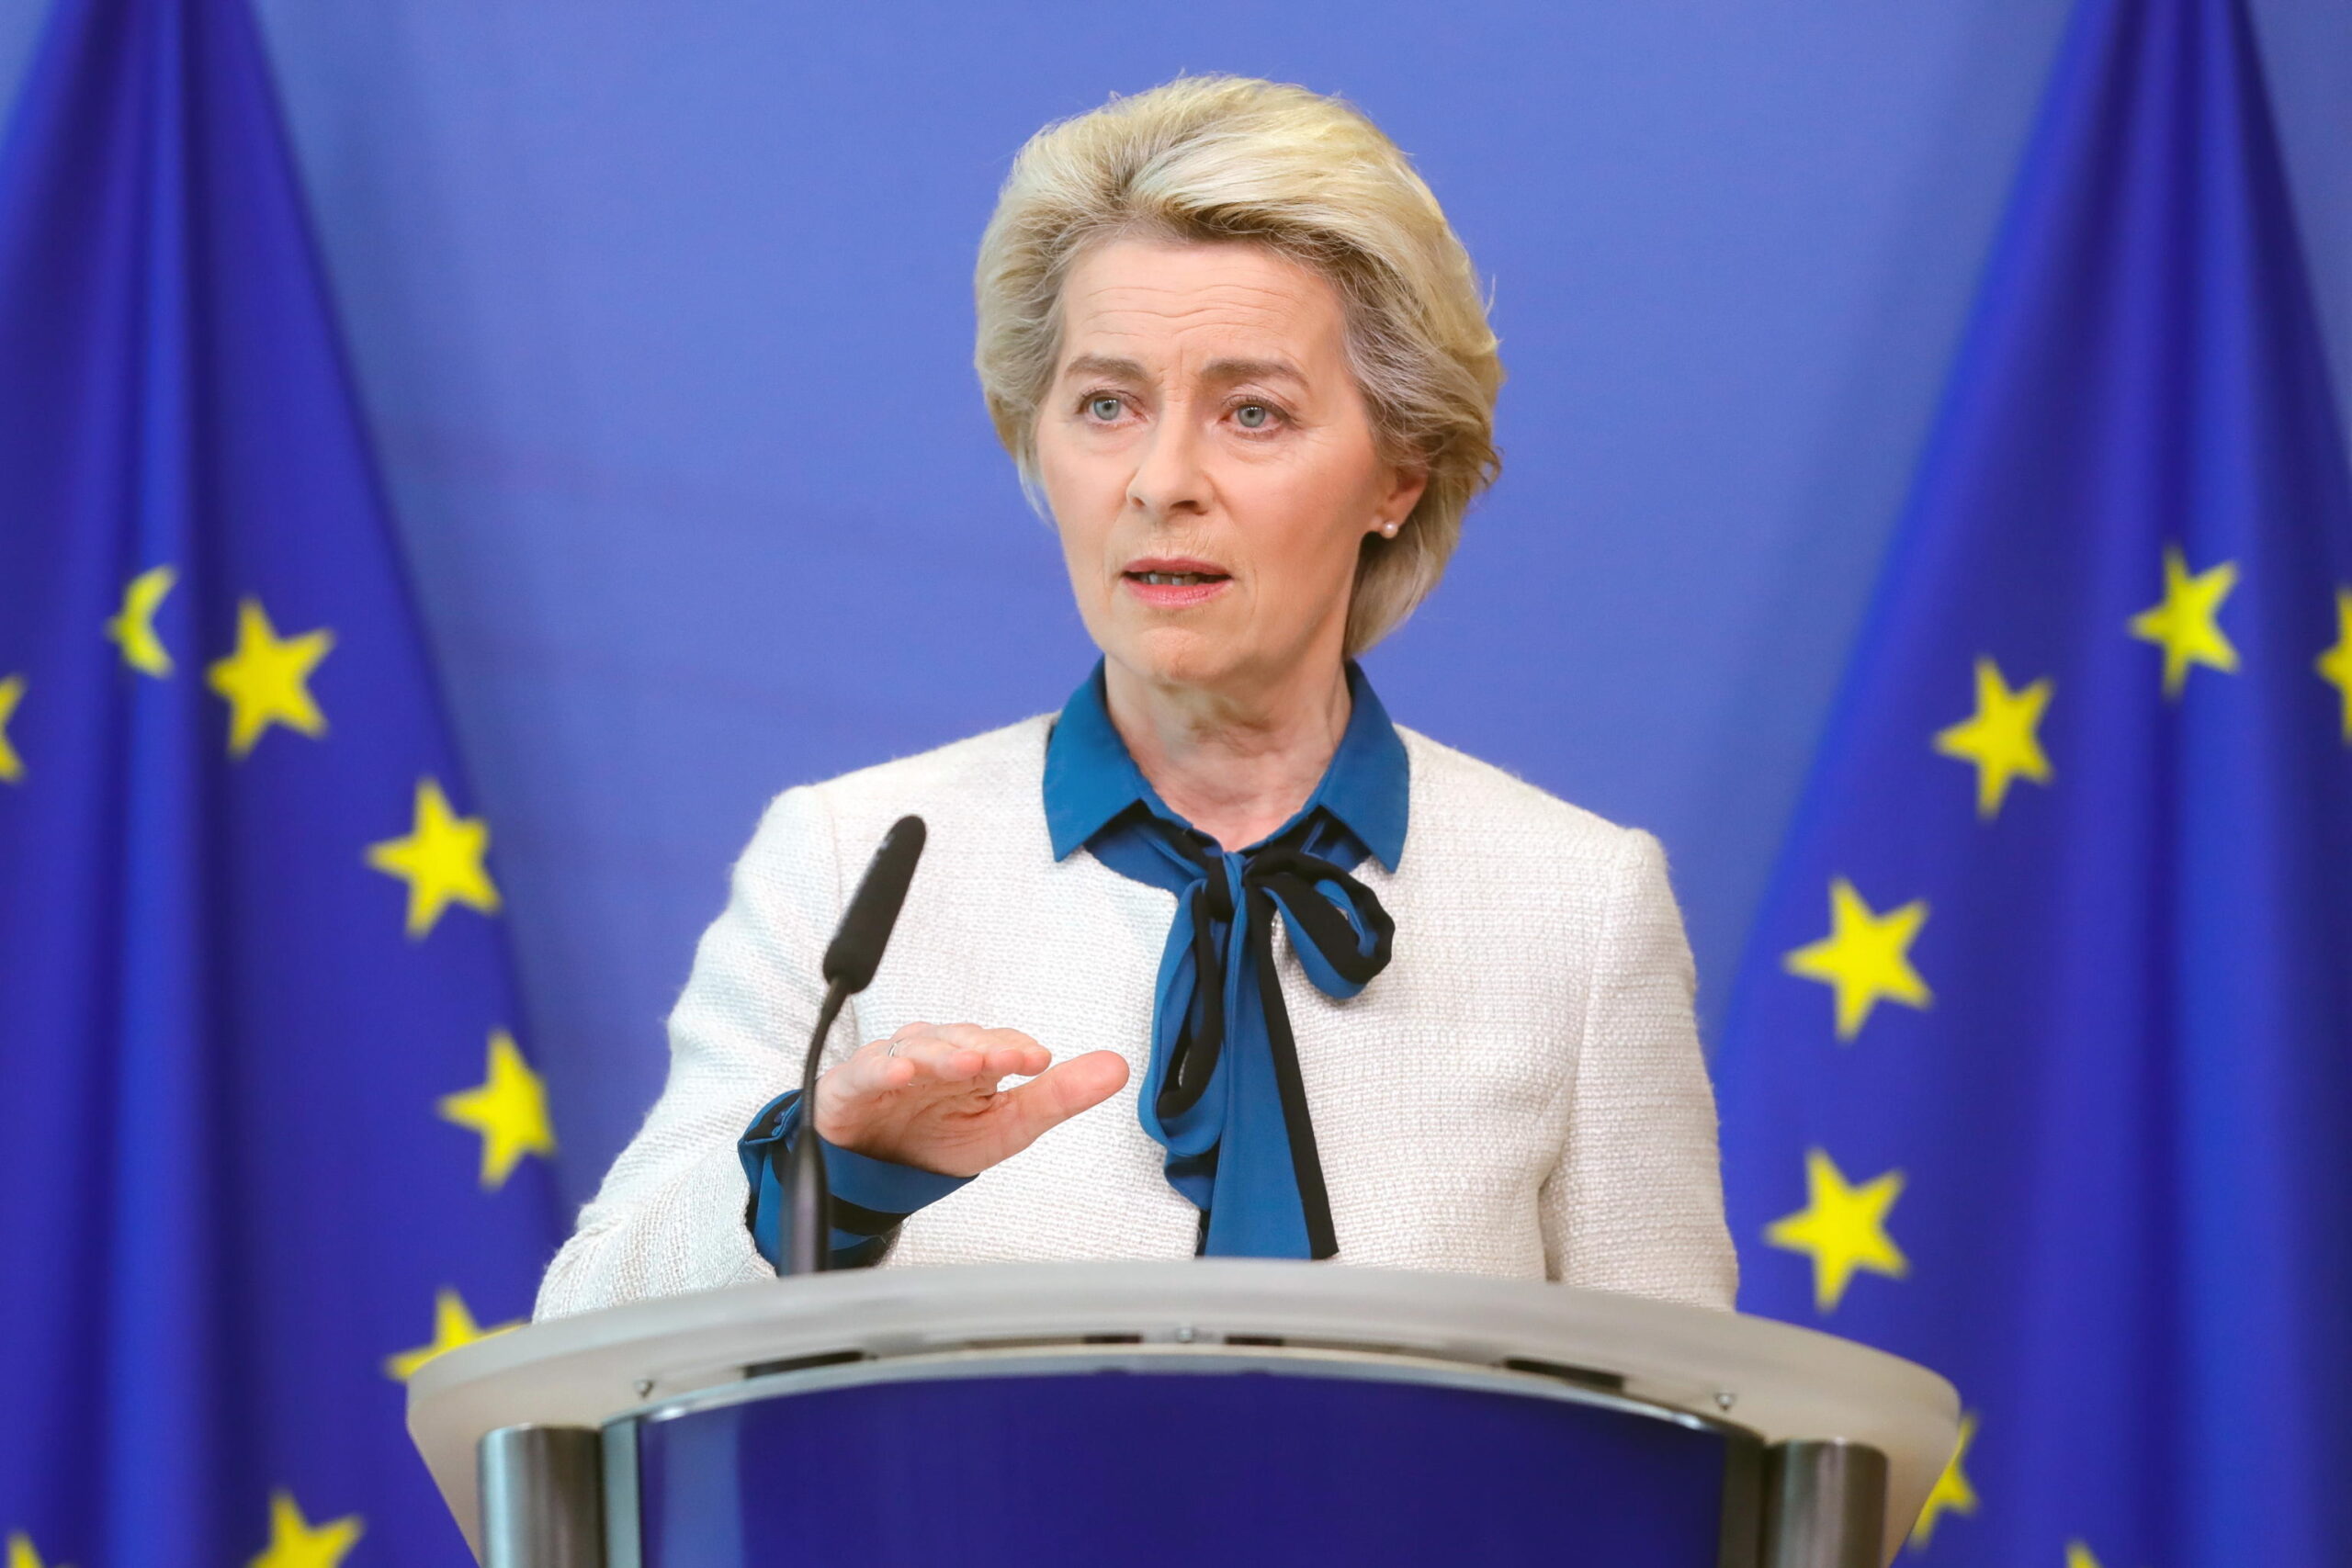 epa09954780 EU Commission President Ursula von der Leyen gives a press statement on the Commission's proposals regarding 'REPowerEU, defence investment gaps and the relief and reconstruction of Ukraine' at the European Commission, in Brussels, Belgium, 18 May 2022.  EPA/STEPHANIE LECOCQ